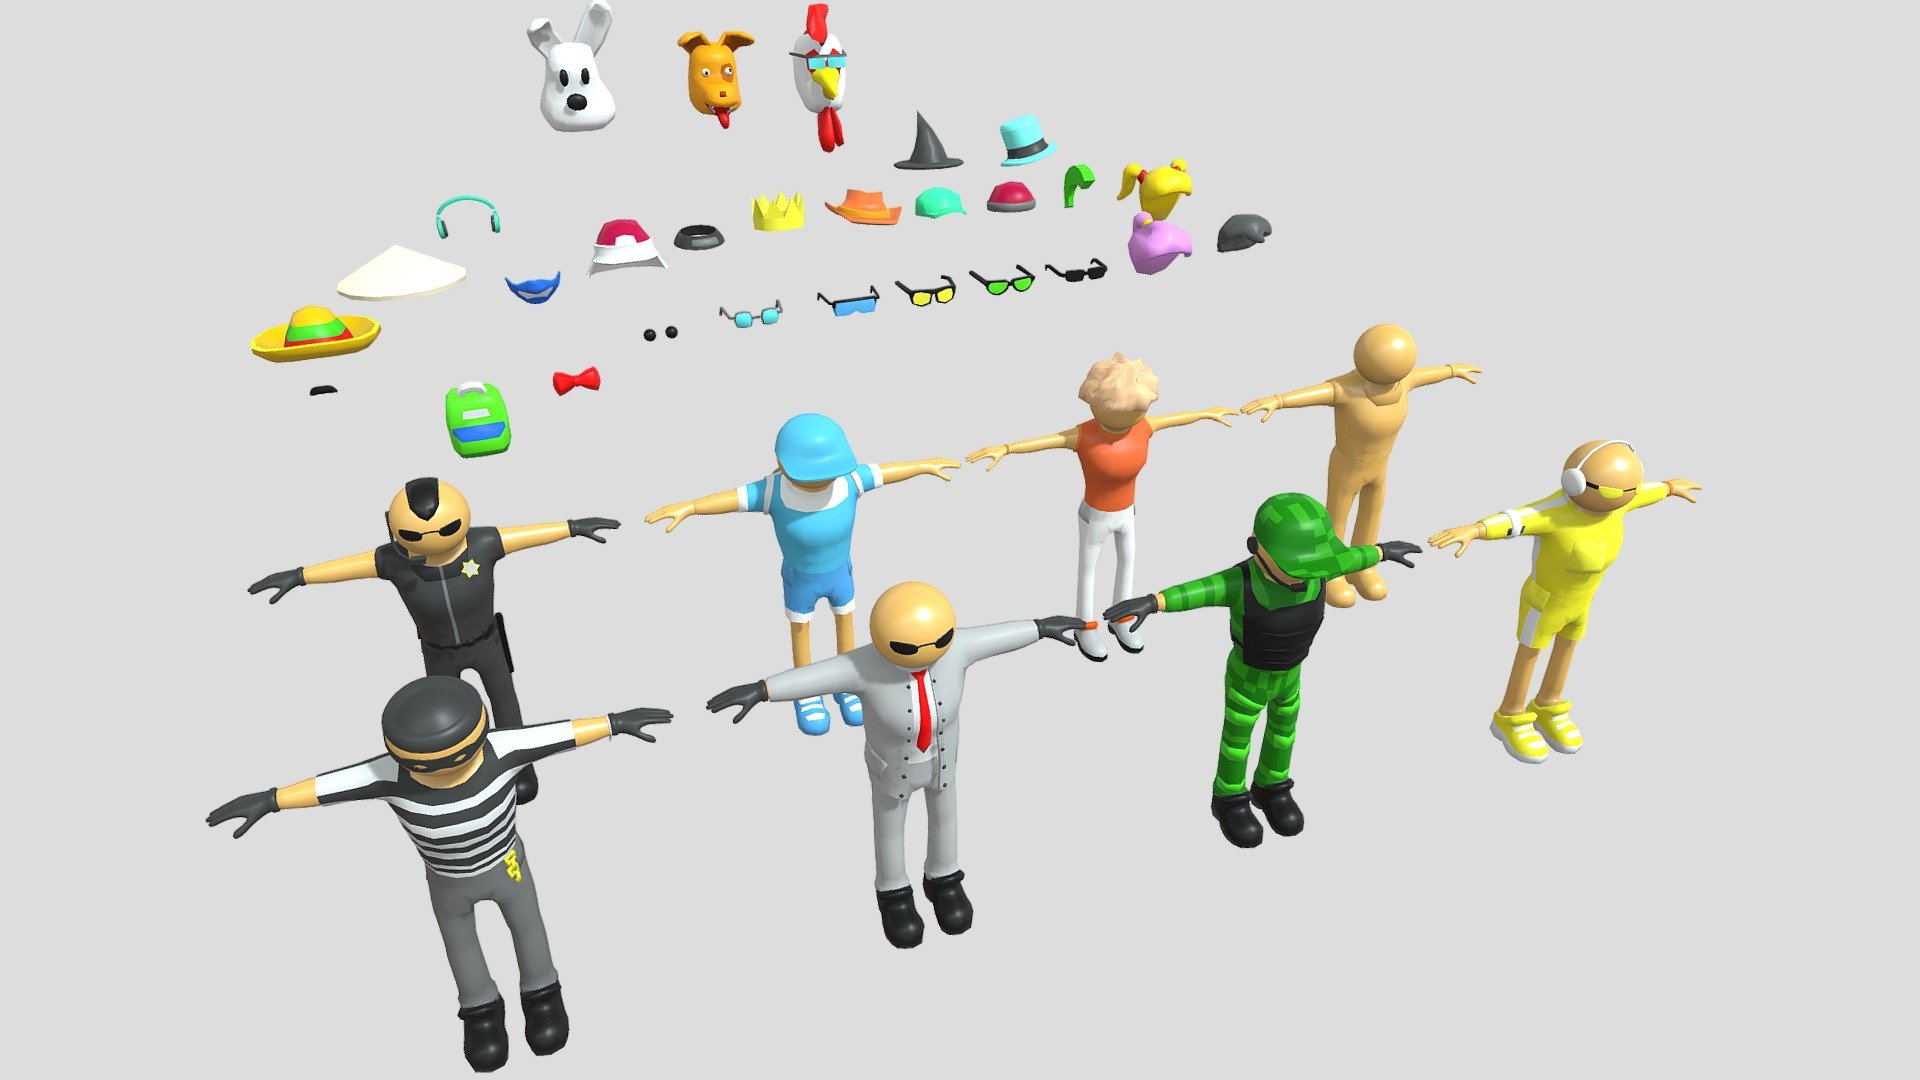 3D costumed character set with interchangeable body parts, animation bones and Ragdoll

Package constructor of low-polygonal characters with bones for animation. All parts of the character are interchangeable, you can change the character’s arms, torso, legs, etc. Characters configured to work with Mixamo (animations are not included in this package) Each character has regdoll animation customized

The zip archive contains the following files: 
Unity. 
Blender. 
FBX. 
Textures

Package includes:

Characters - 10 pcs Headwear - 15pc Glasses - 9pc Hair - 5pcs Animal masks - 3pcs Accessories - 8pc

Bones ready for Mixamo animation

Ragdoll

Character Builder

Technical details:

All models use the same material and texture (as a color palette) resolution: 128*128 px. Leather texture has its own material and can be changed. The average model has 2-4k faces.

Created by Deslab - 3D Costumed Character Pack Low Poly Unity - Buy Royalty Free 3D model by Deslab (@kama12) 3d model